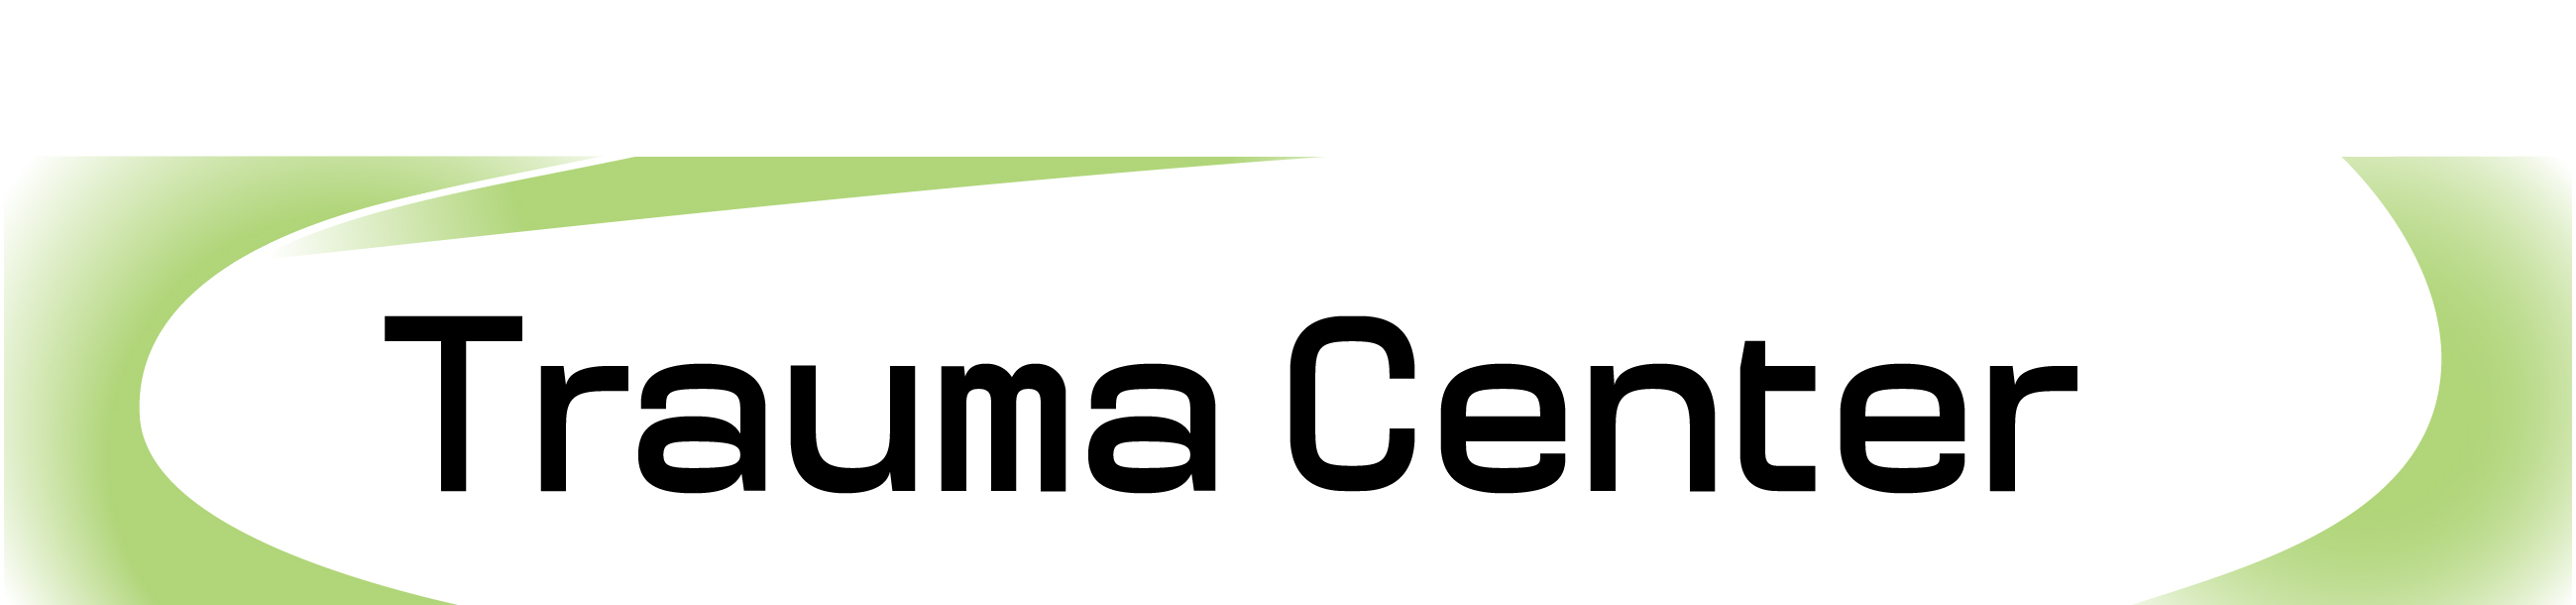 'Trauma Center' surrounded by green gradiant arcs